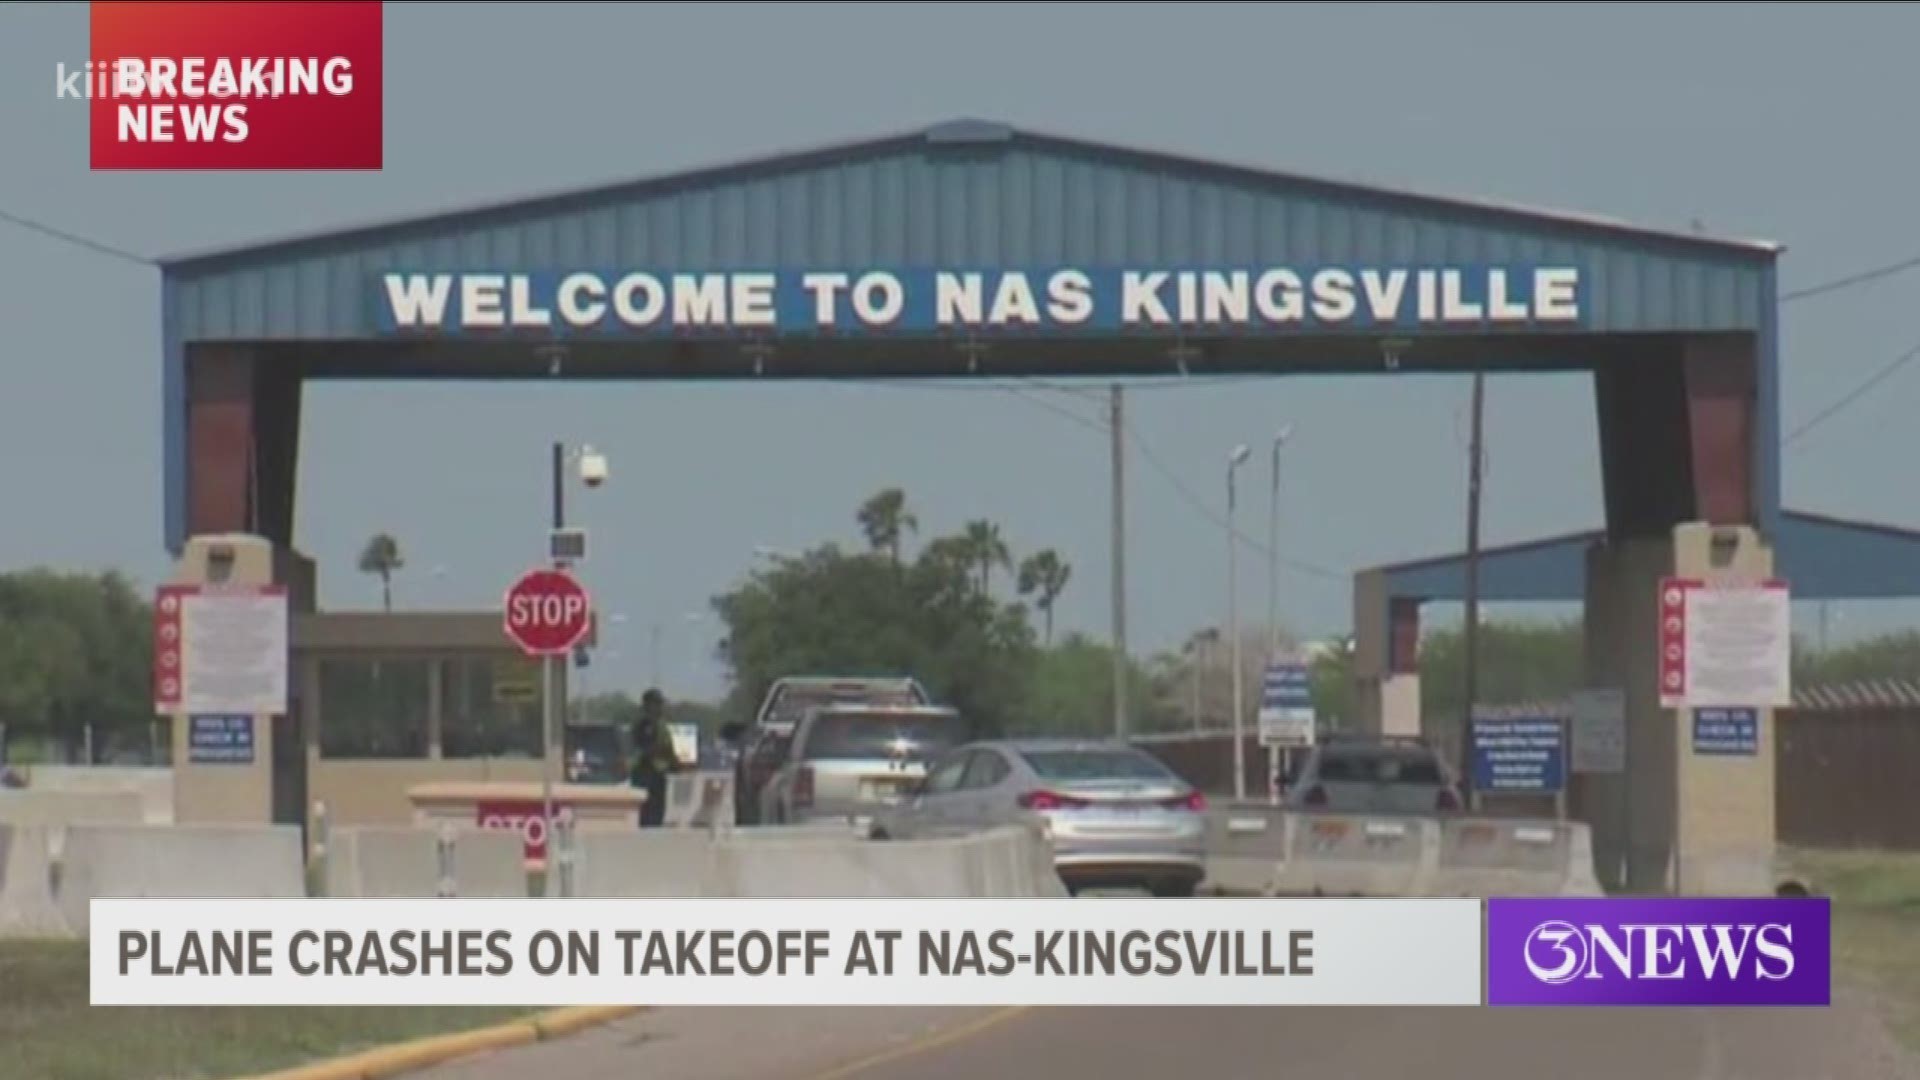 The Chief of Naval Air Training is investigating a plane crash at Naval Air Station-Kingsville that happened around 3:15 p.m. Friday.